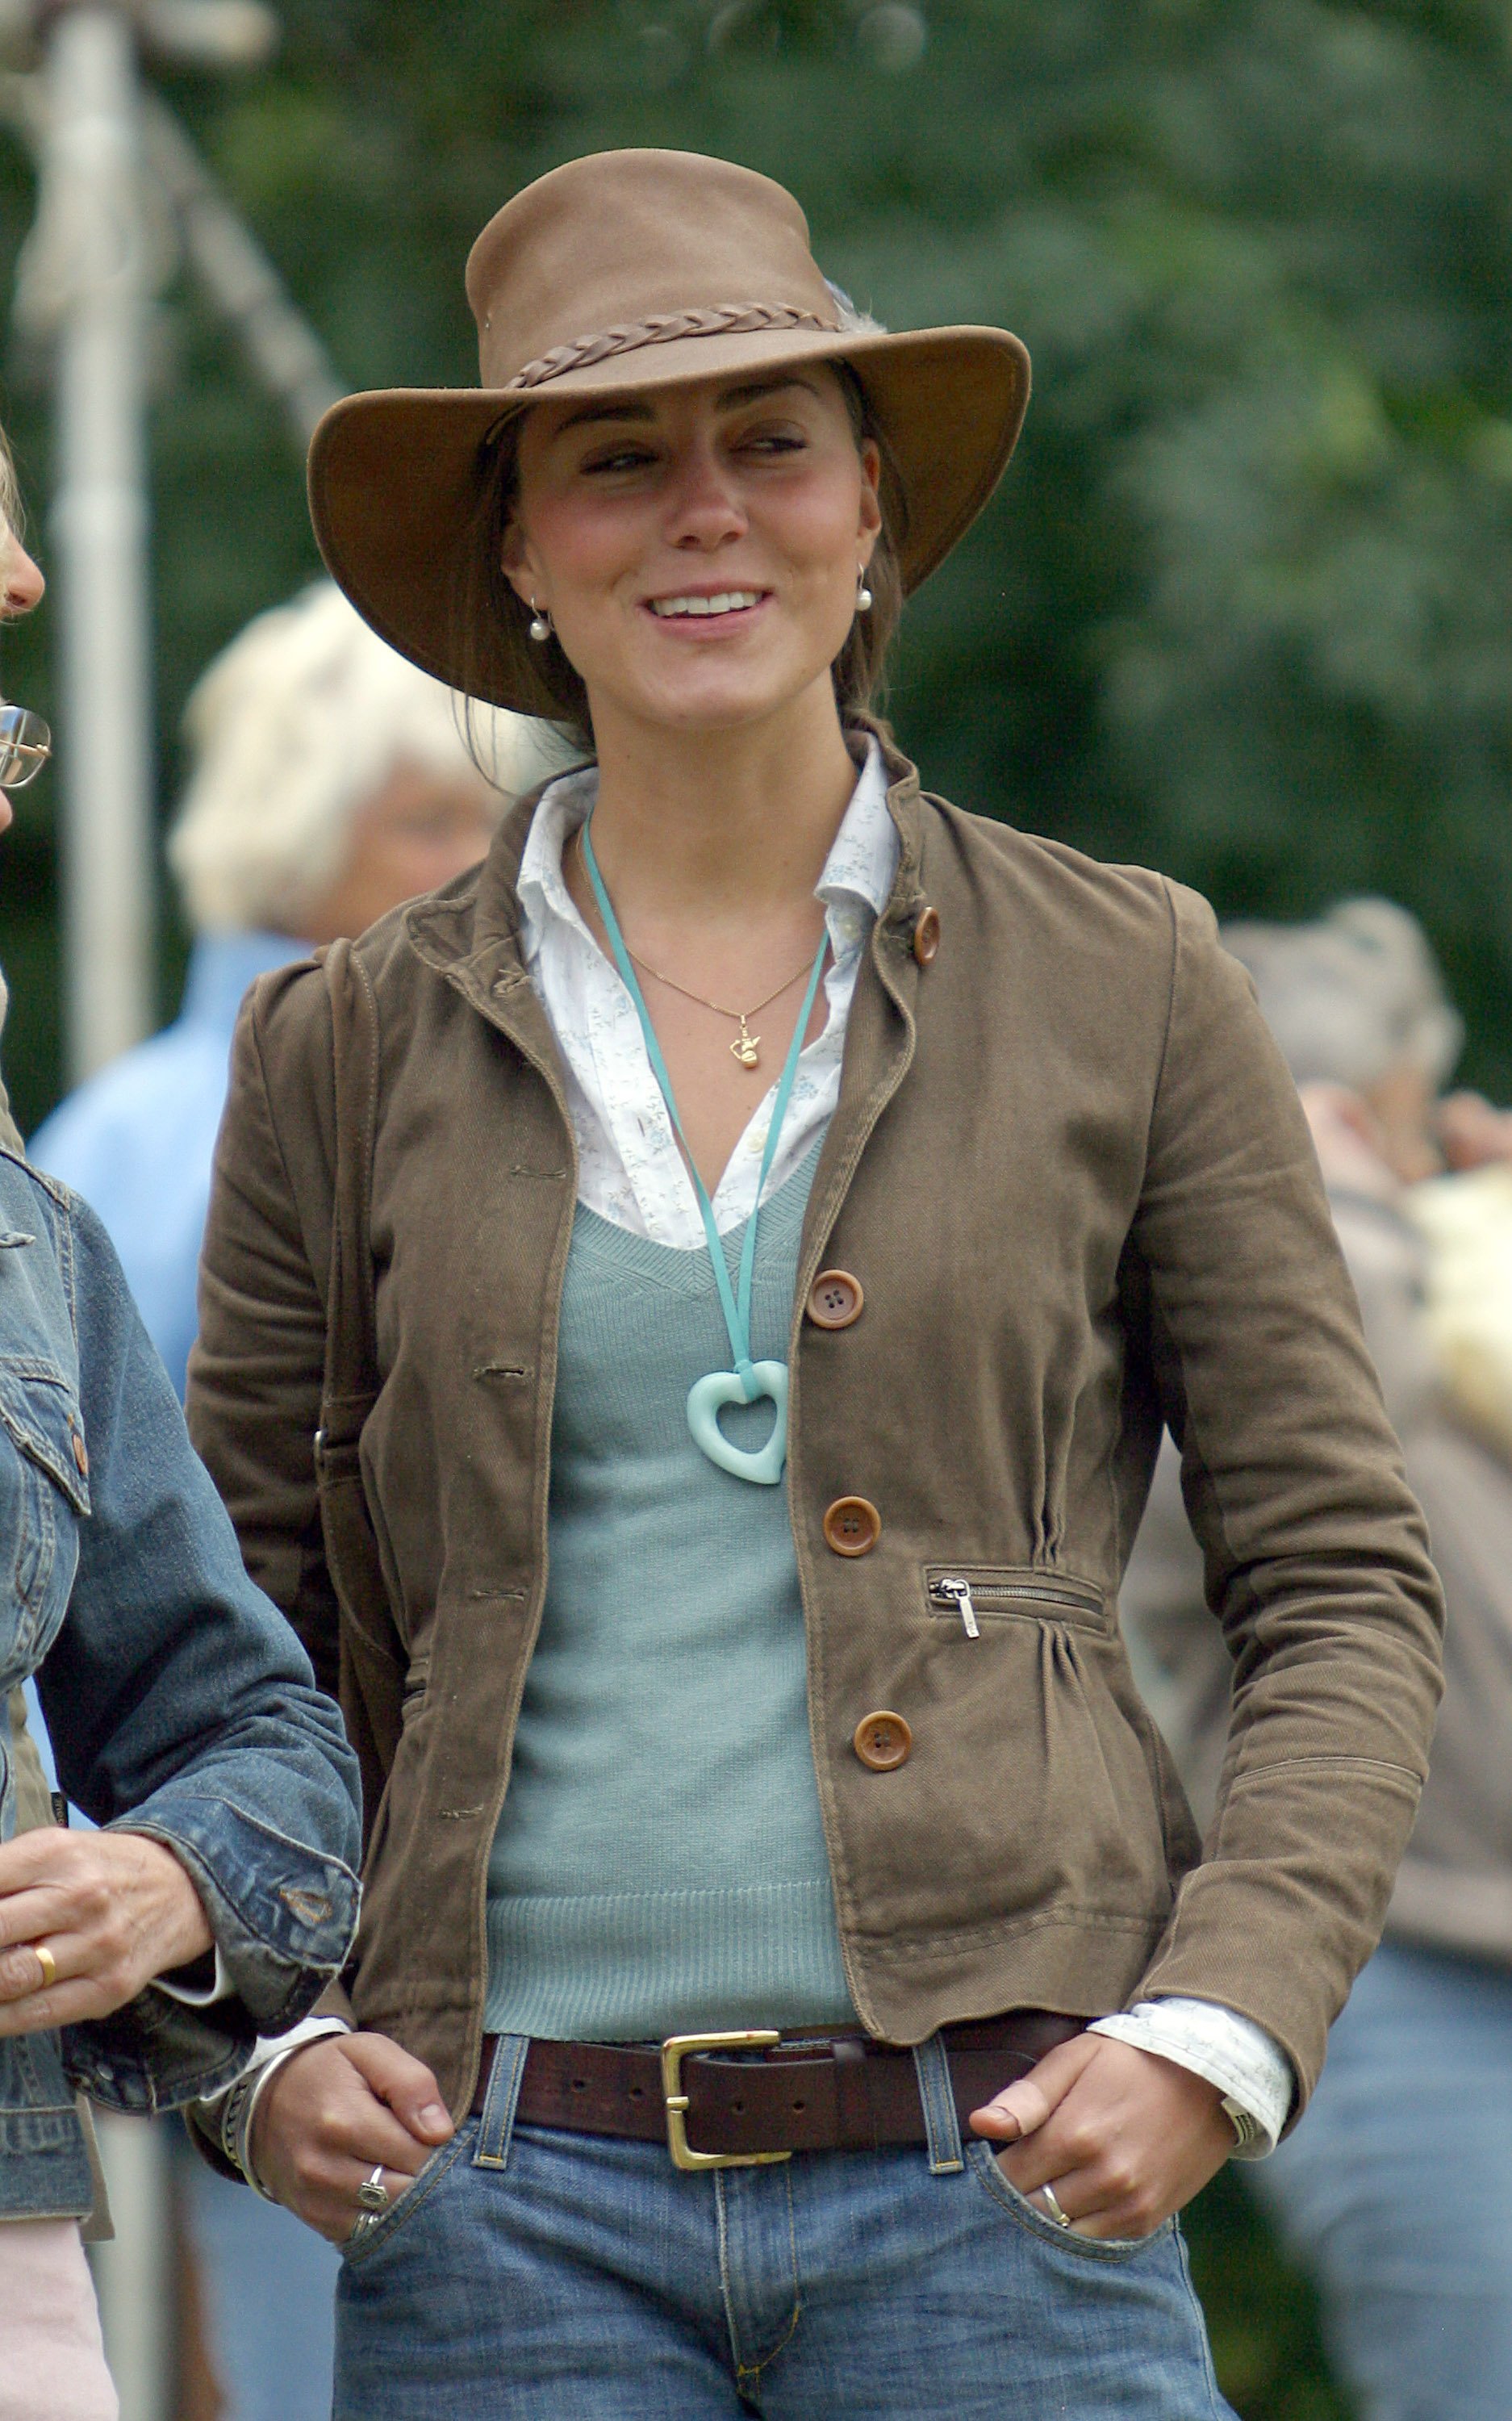 Kate Middleton at the second day of the Gatcombe Park Festival of British Eventing at Gatcombe Park, on August 6, 2005 near Tetbury, England. | Source: Getty Images